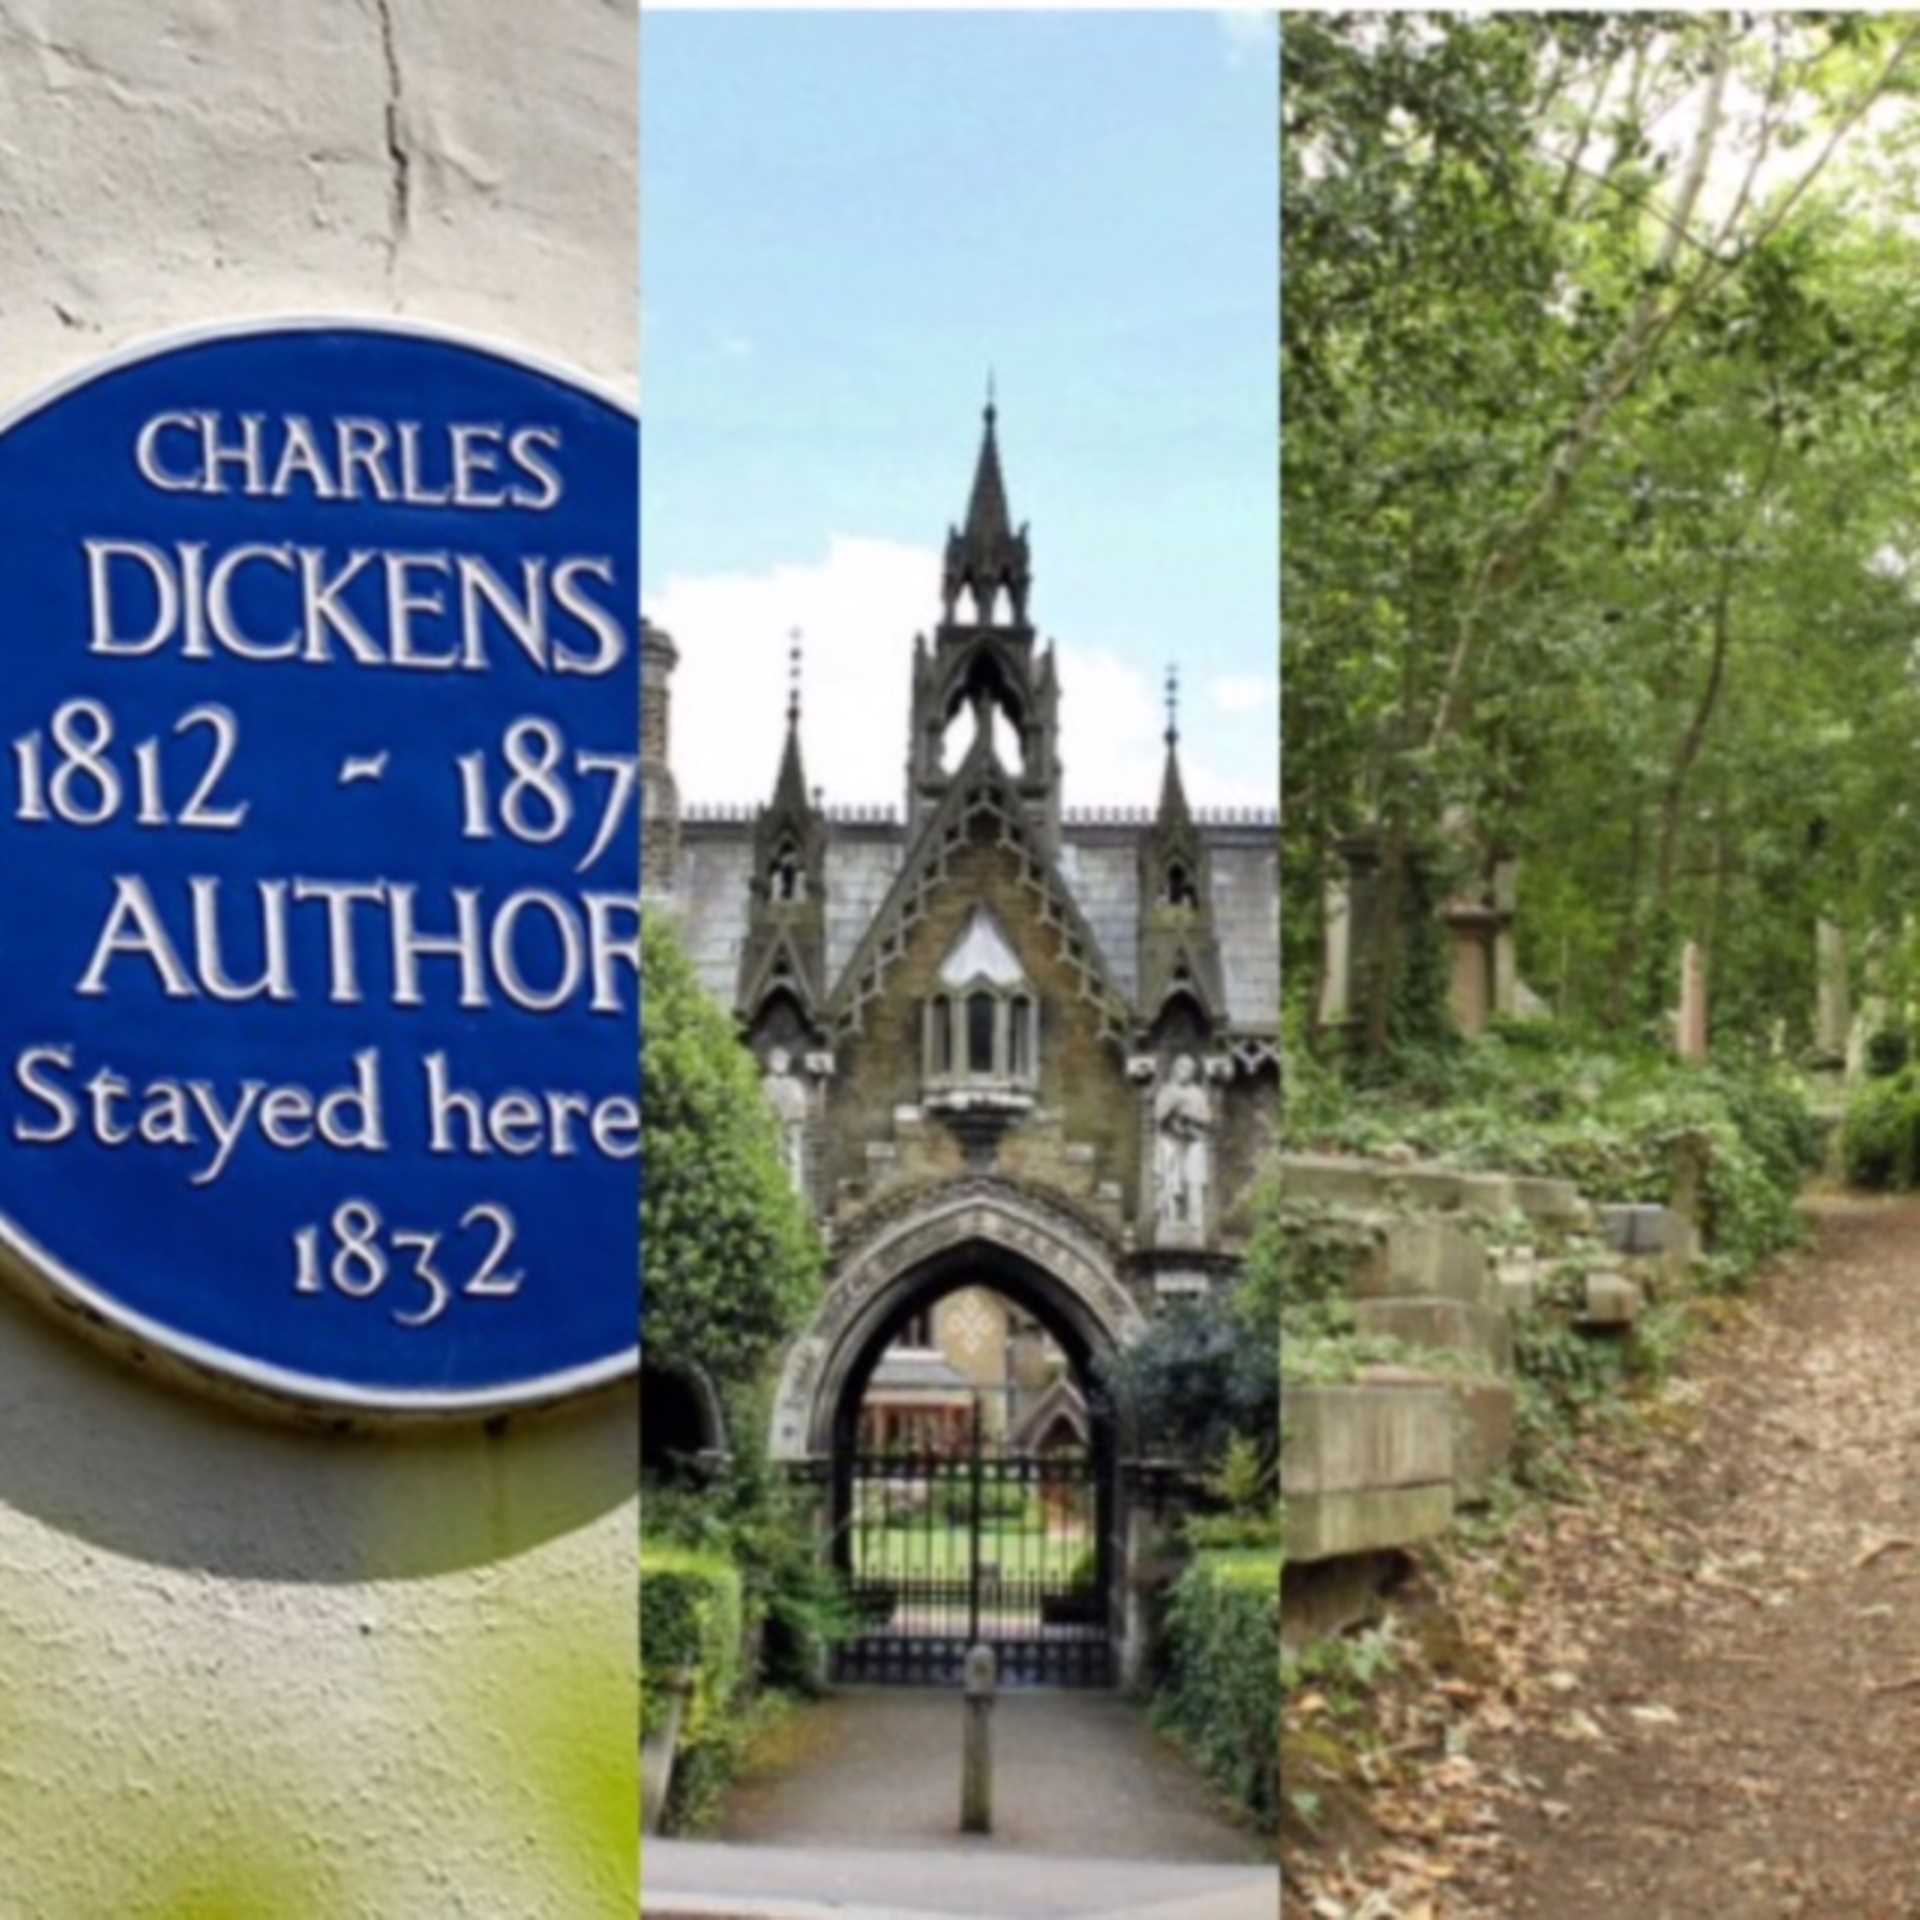 10 Reasons To Move To Highgate - Day 9 - Connection with History